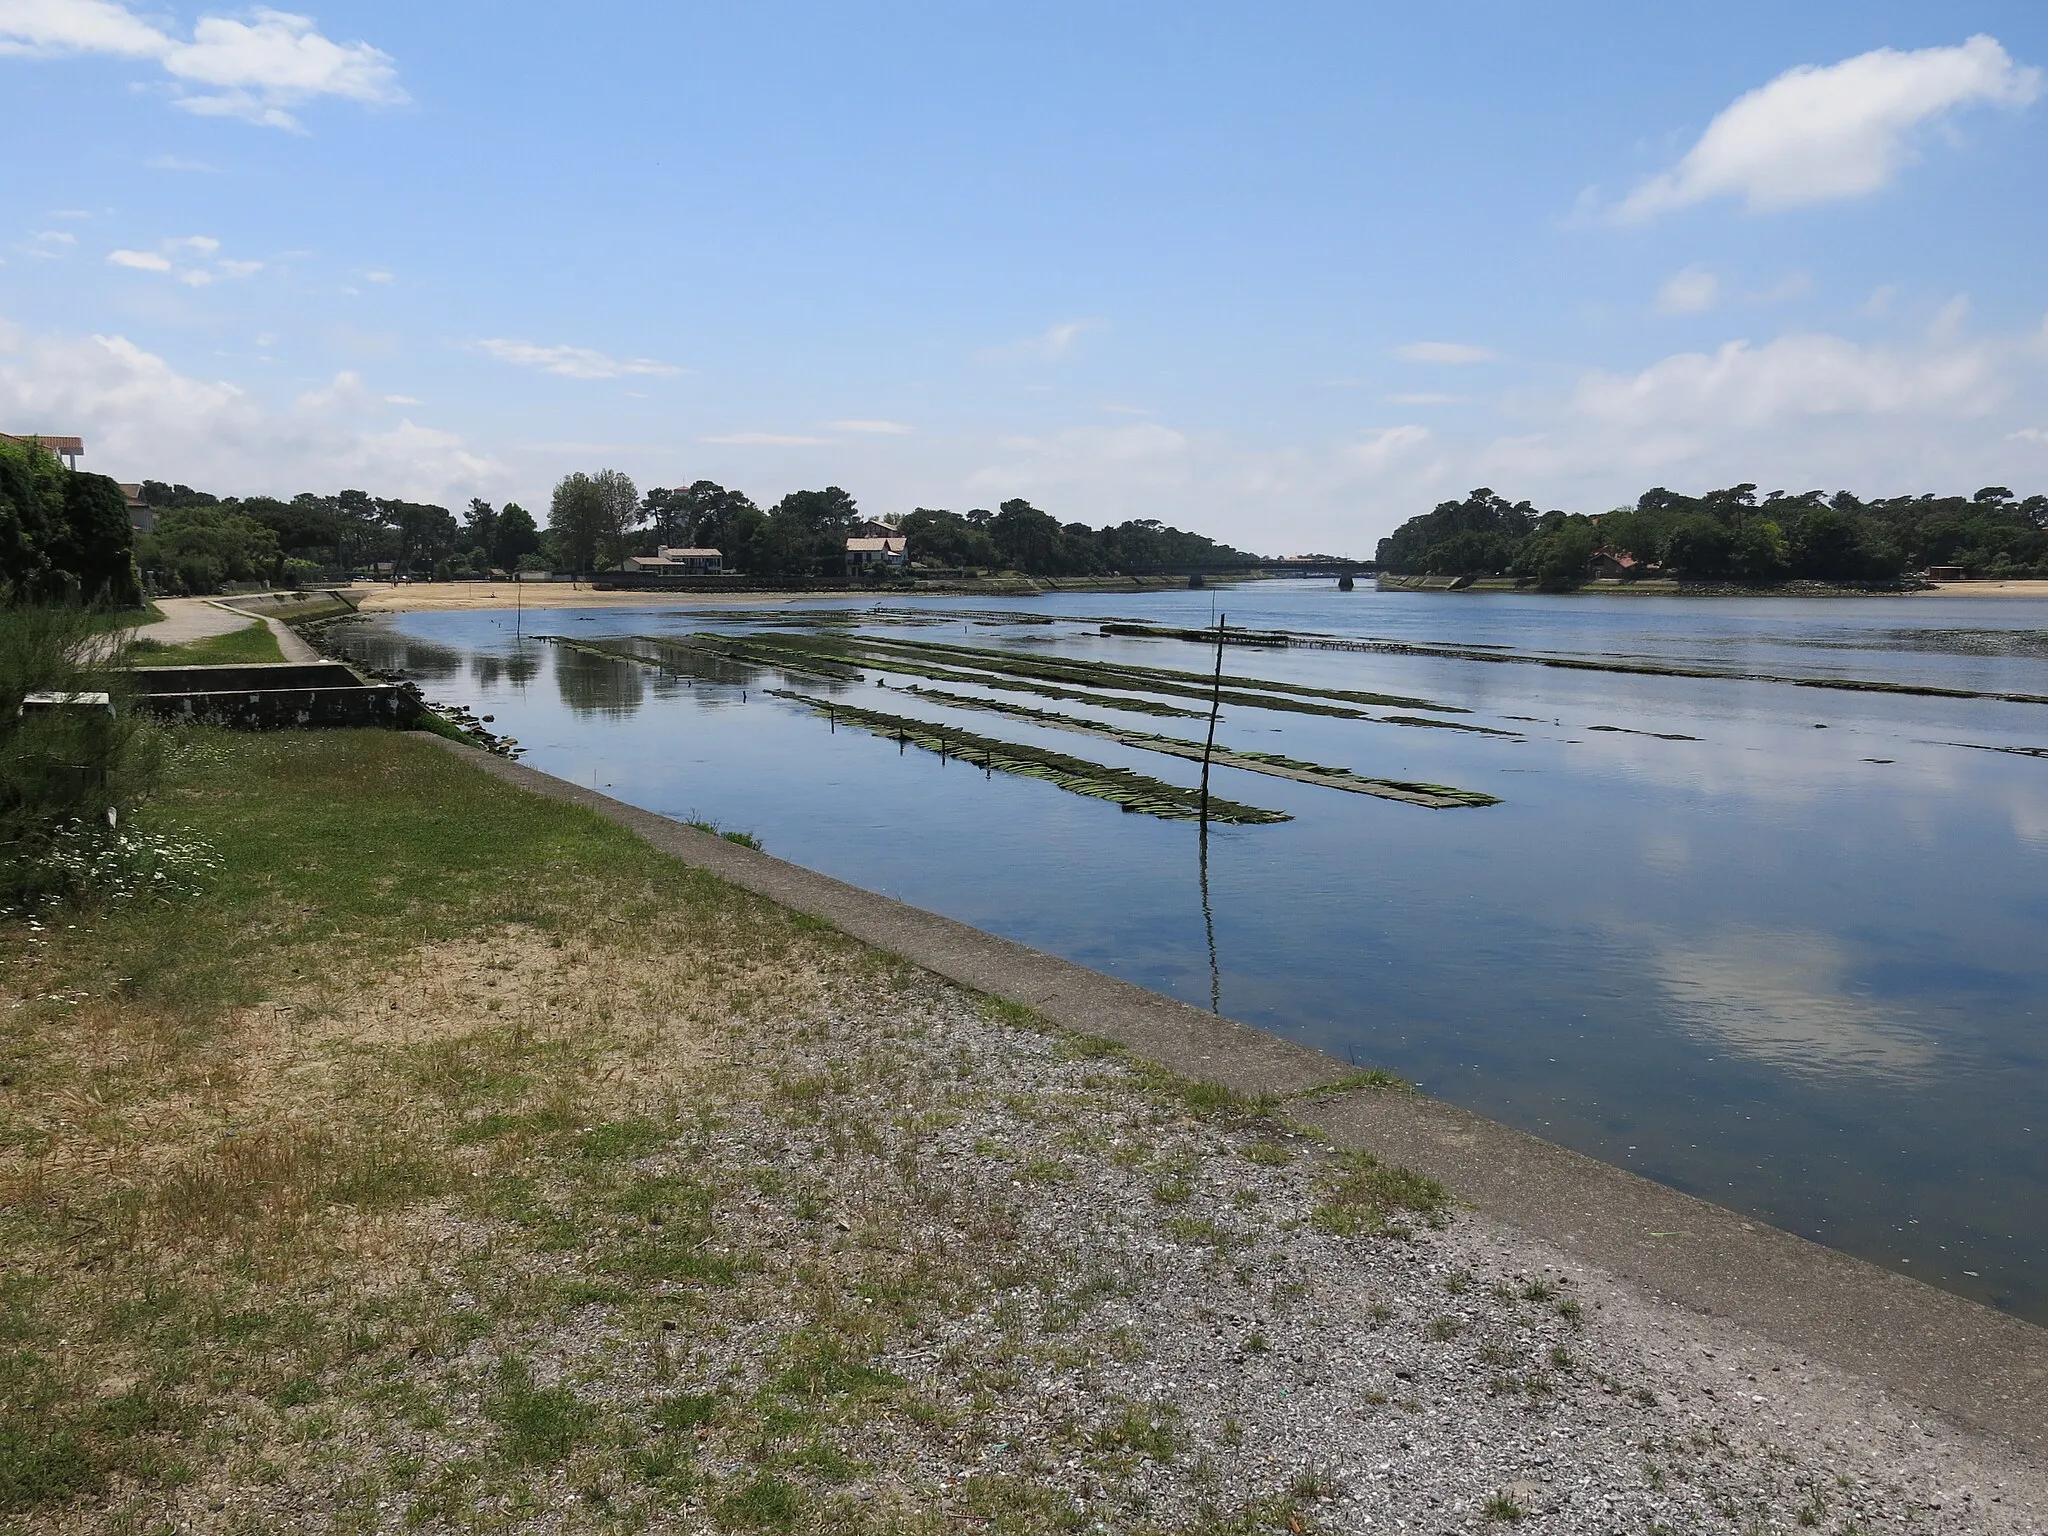 Photo showing: Oyster bags in the Hossegor lake (Landes, France).